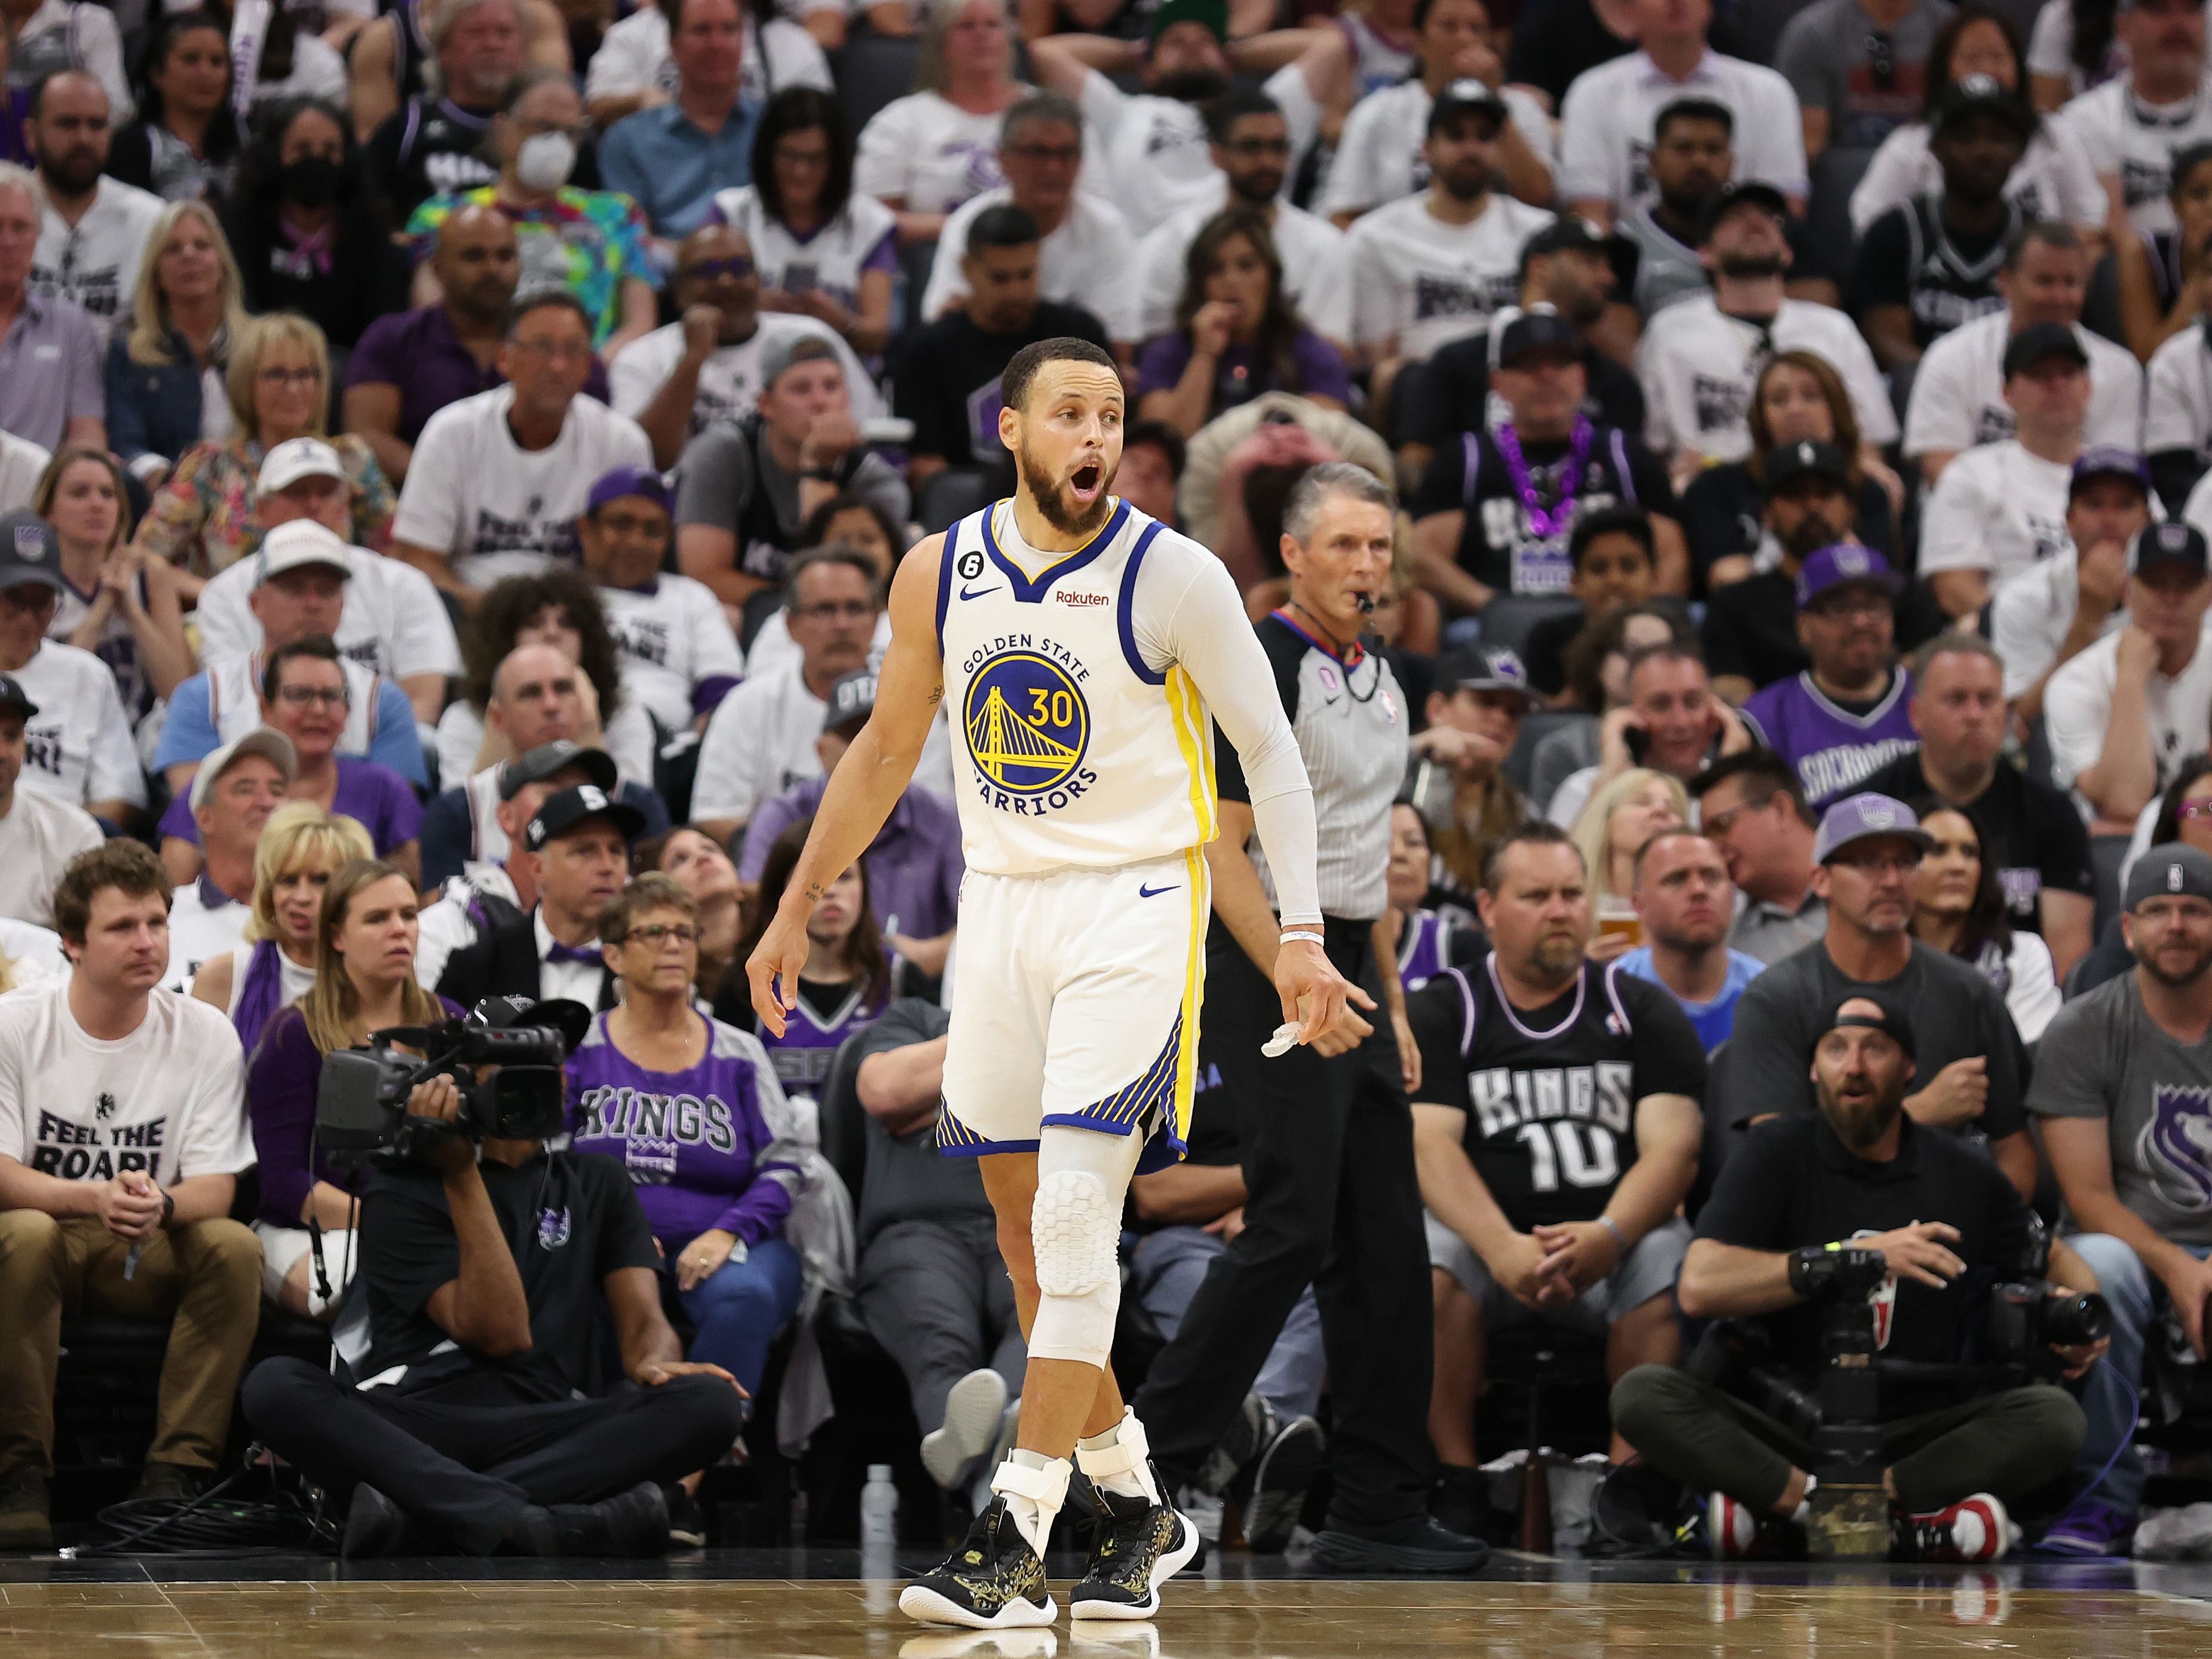 Ayesha Curry takes to Instagram to praise Steph Curry